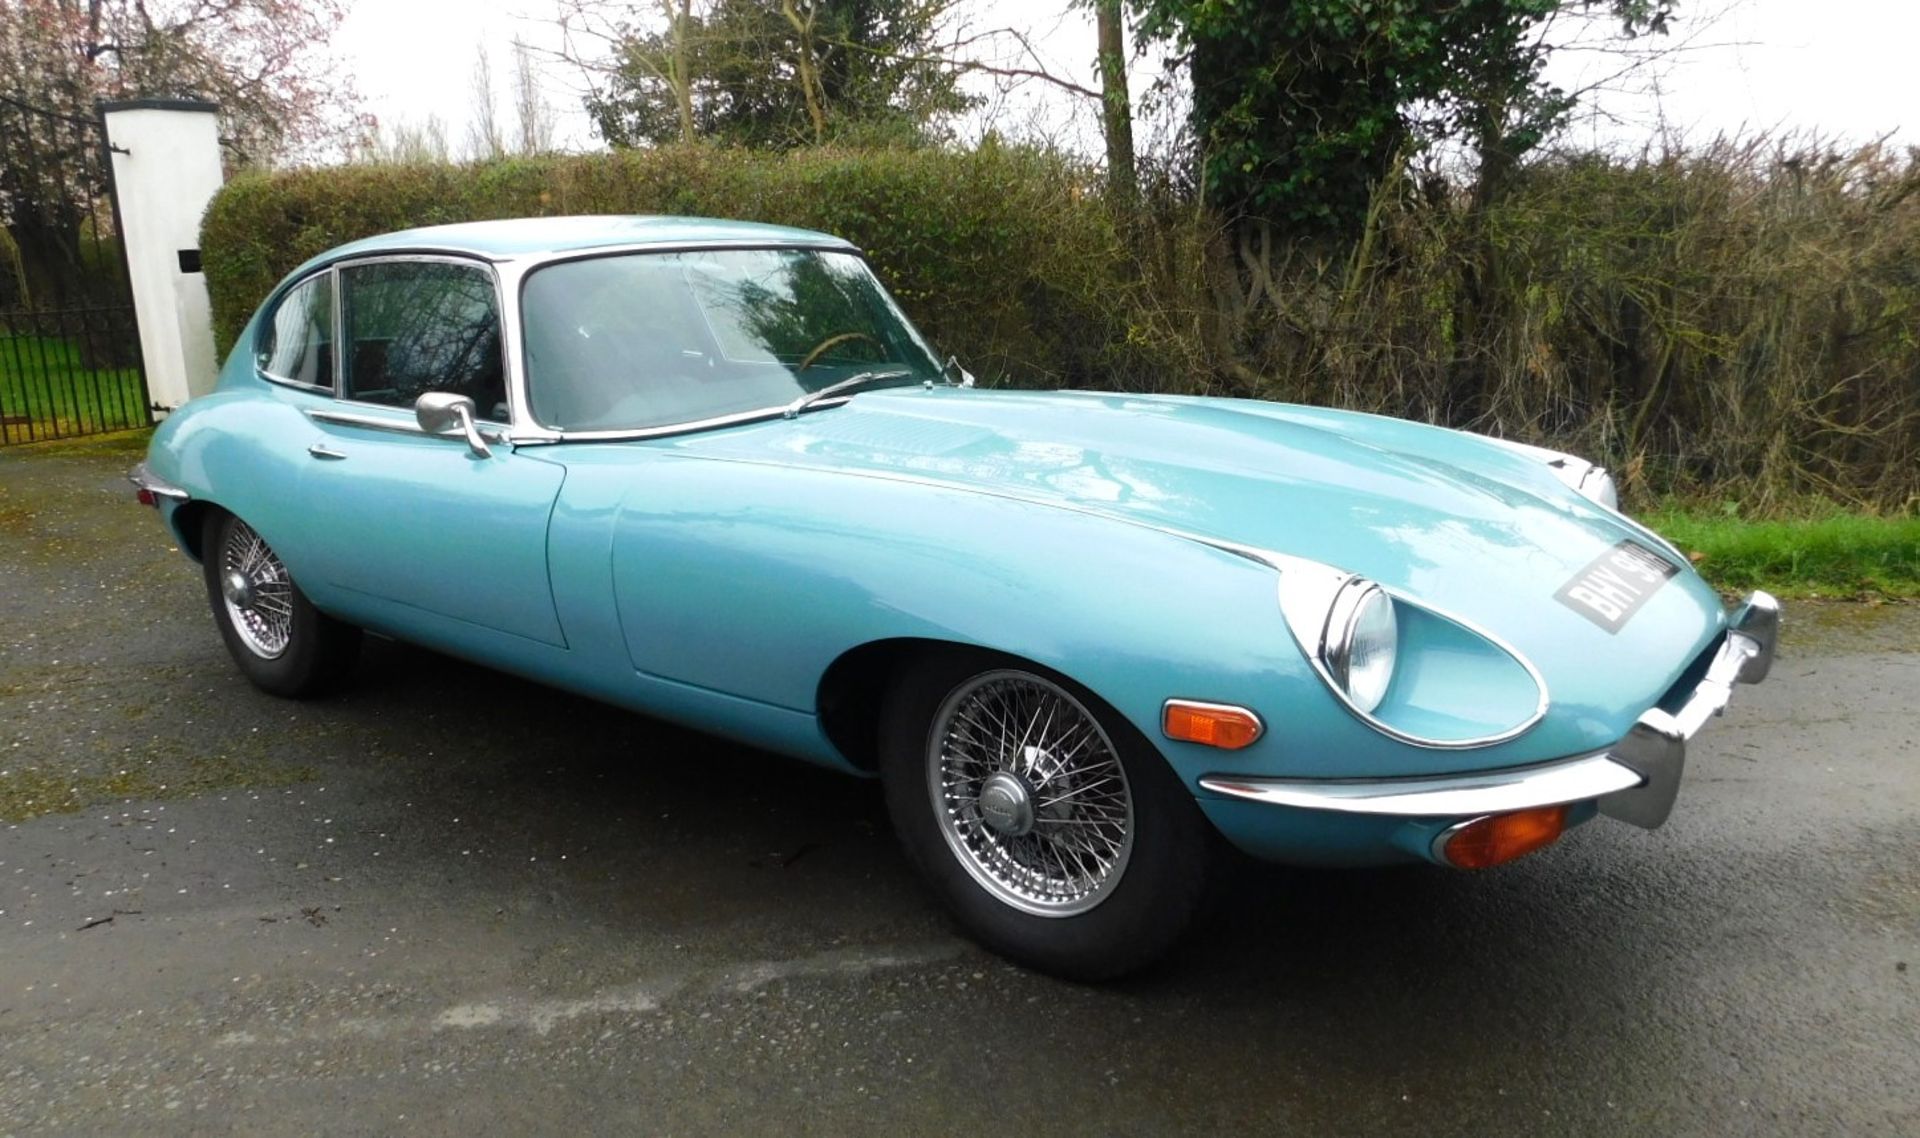 1970 JAGUAR E-TYPE SERIES II 2+2 COUPE Registration Number: BHY 981H Chassis Number: P1R44144BW - Image 4 of 33